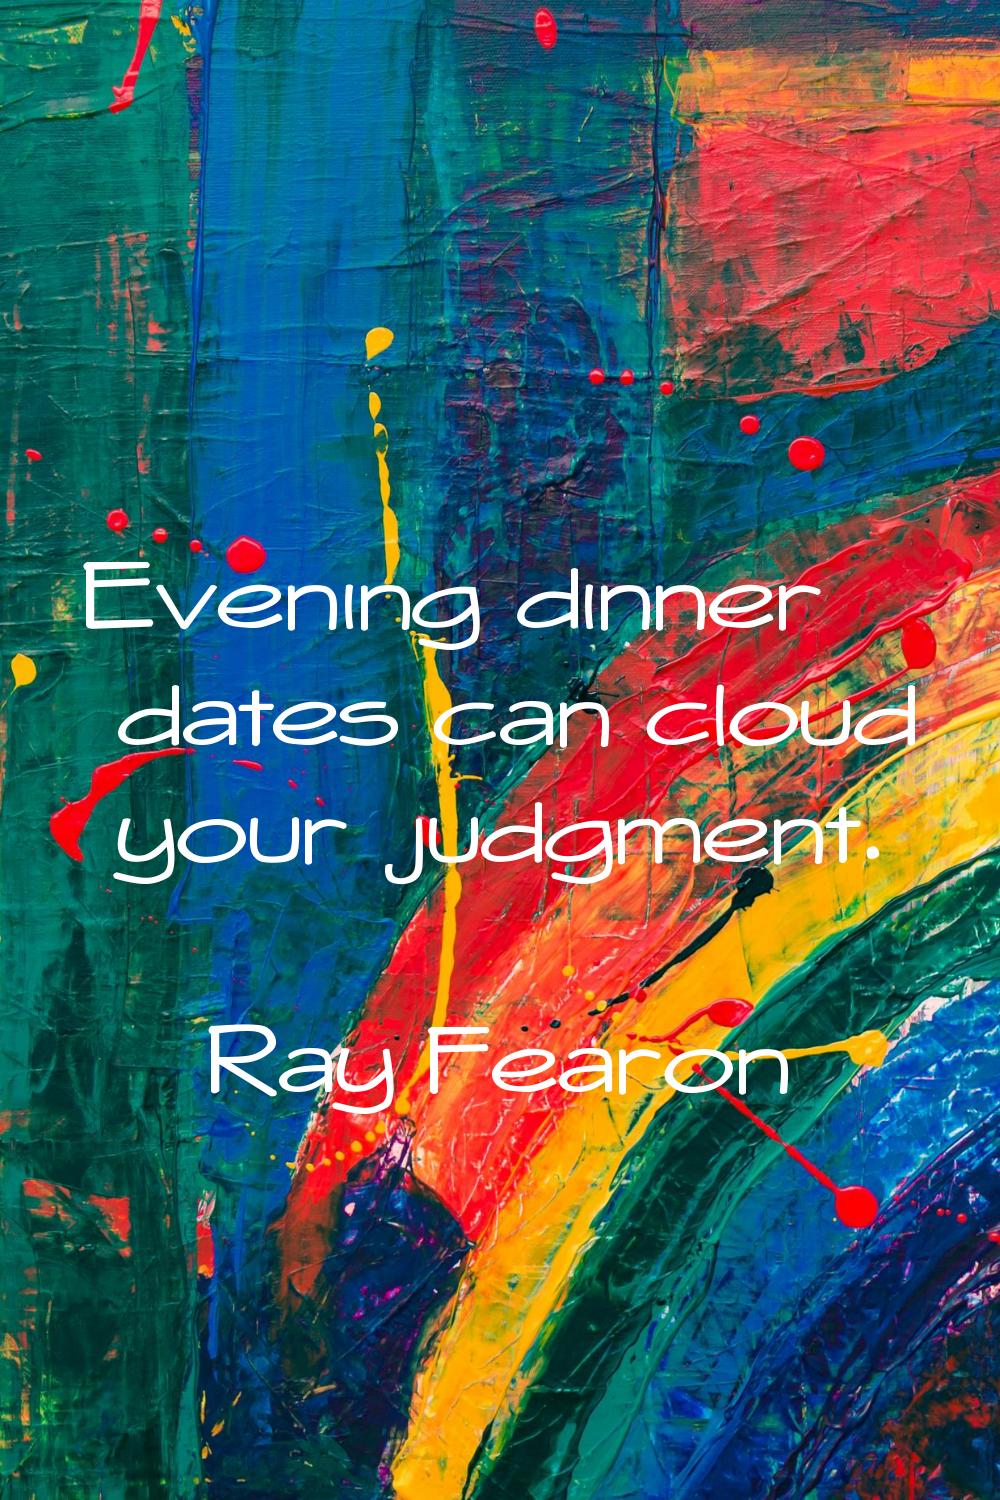 Evening dinner dates can cloud your judgment.